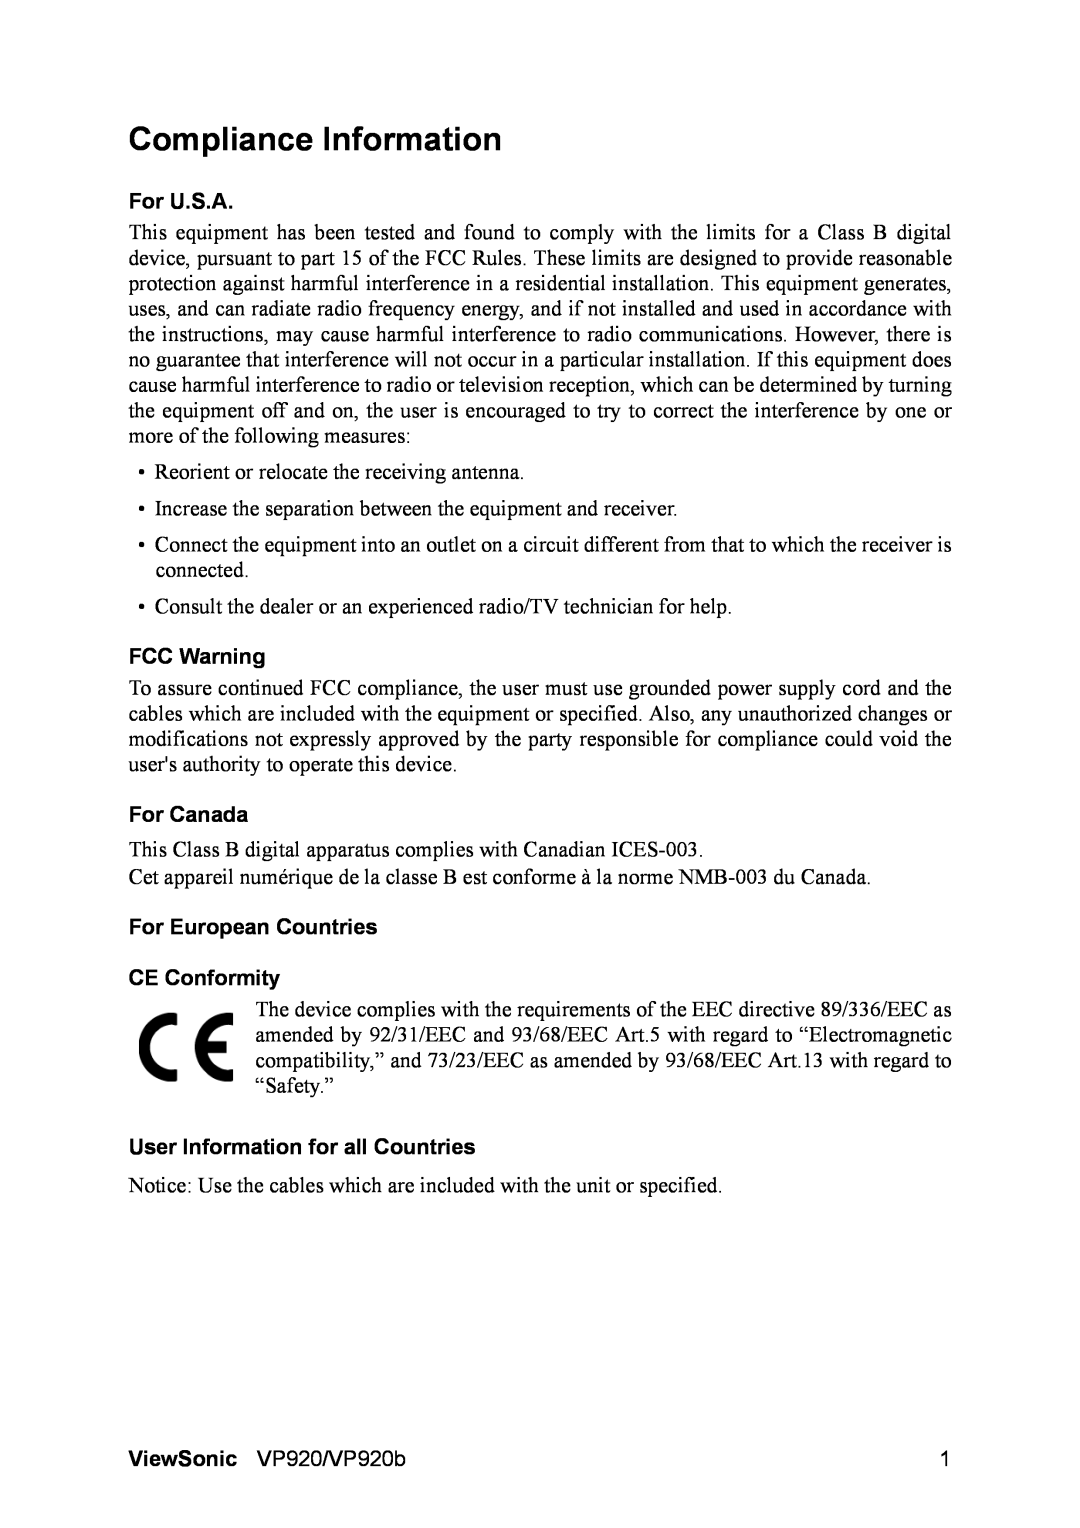 ViewSonic VP920B manual Compliance Information, For U.S.A, FCC Warning, For Canada, For European Countries CE Conformity 